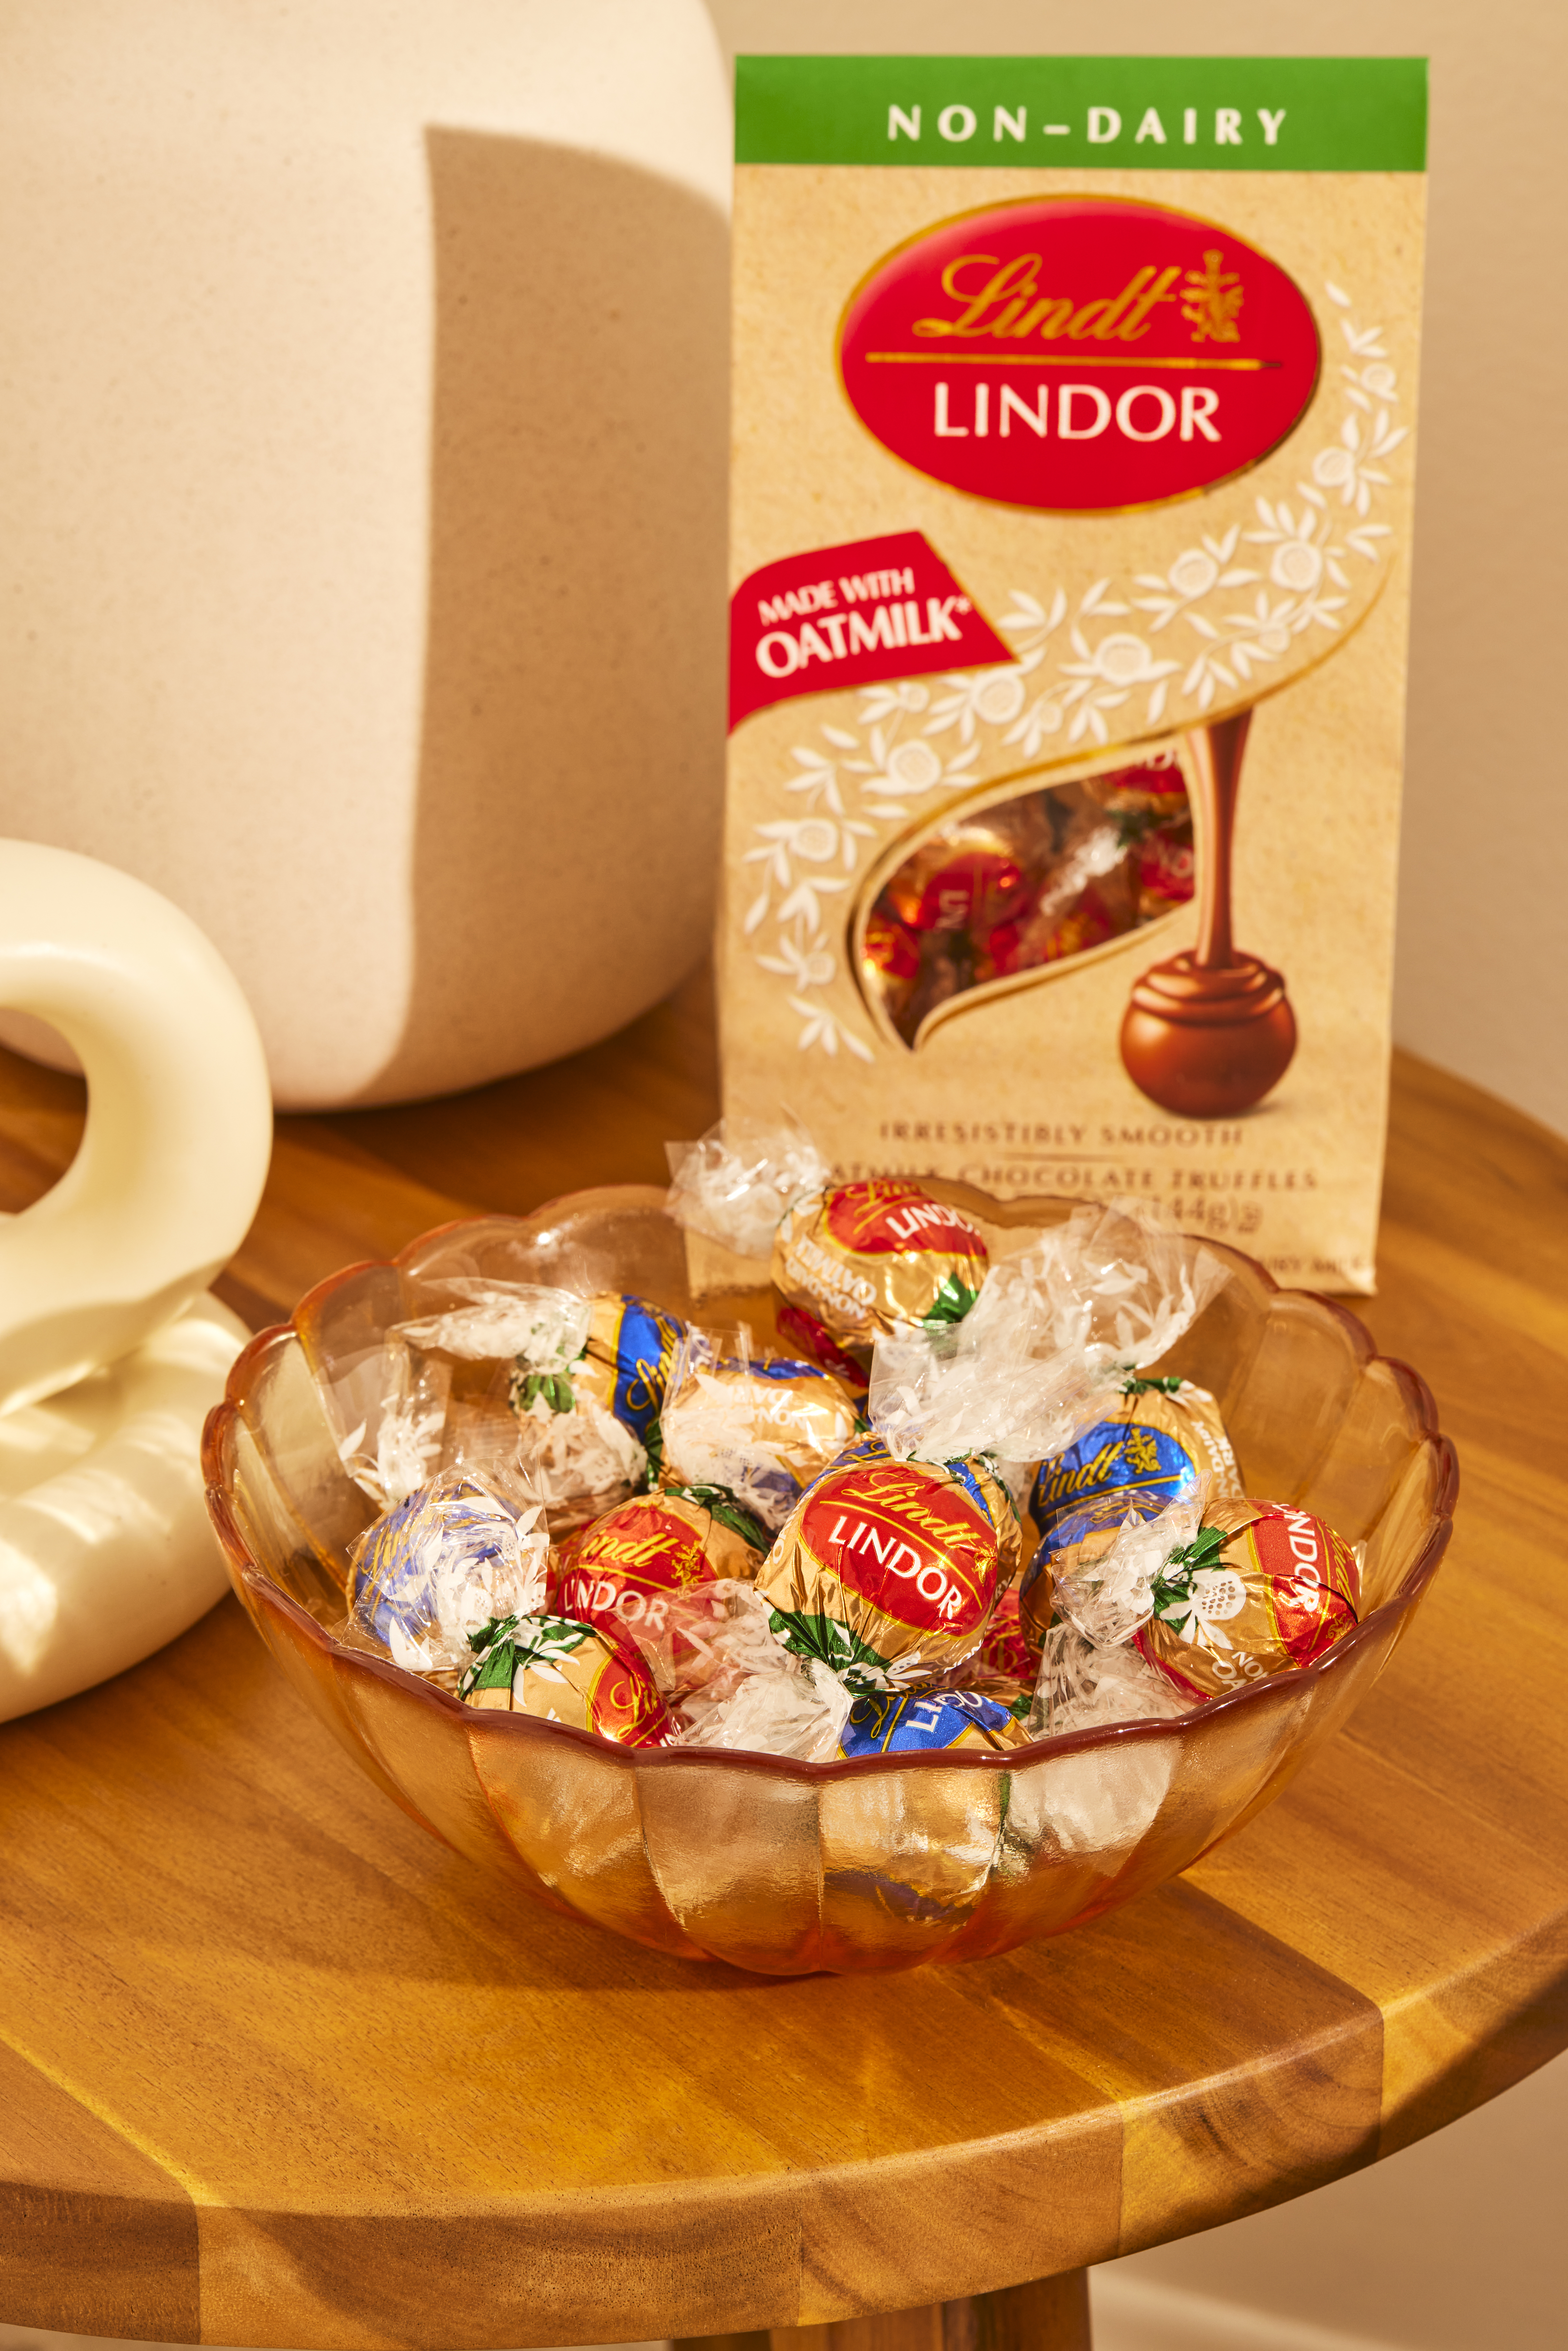 Non-Dairy Fans, Rejoice: New Lindt LINDOR OatMilk Chocolate Truffles Have Arrived